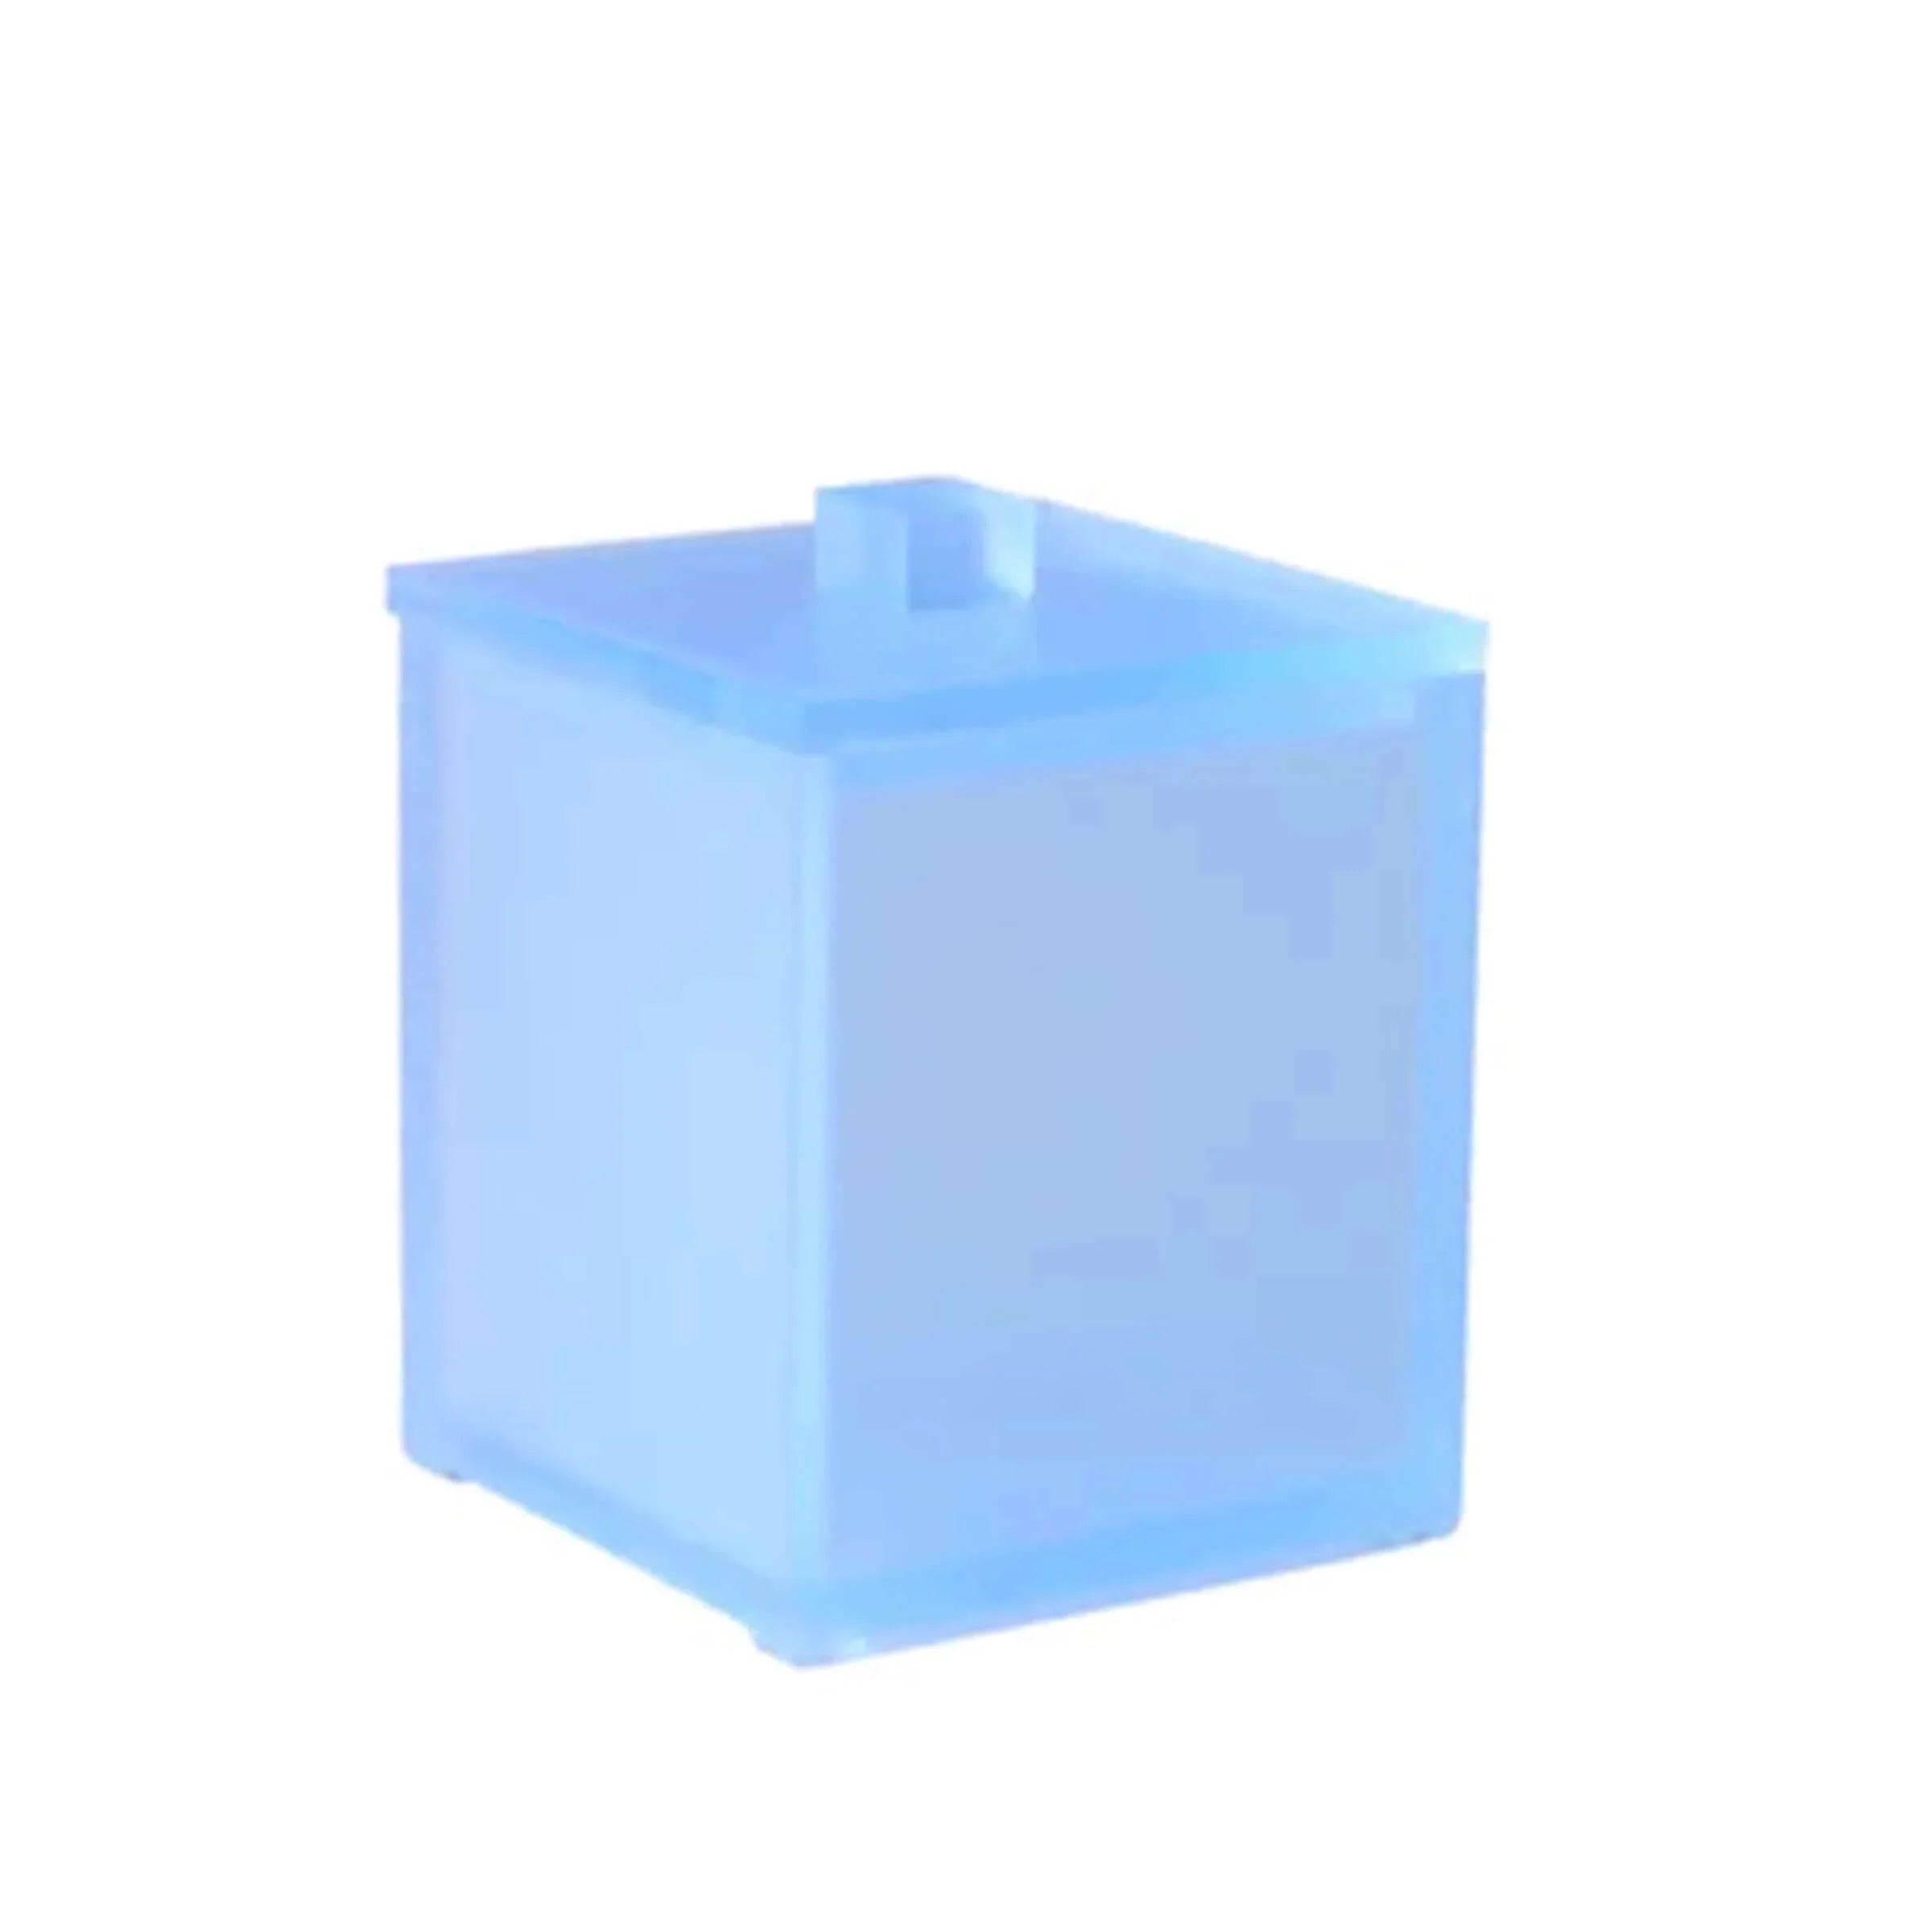 Mike + Ally - Ice Frosted Sky Container - 31433 - Blue - 